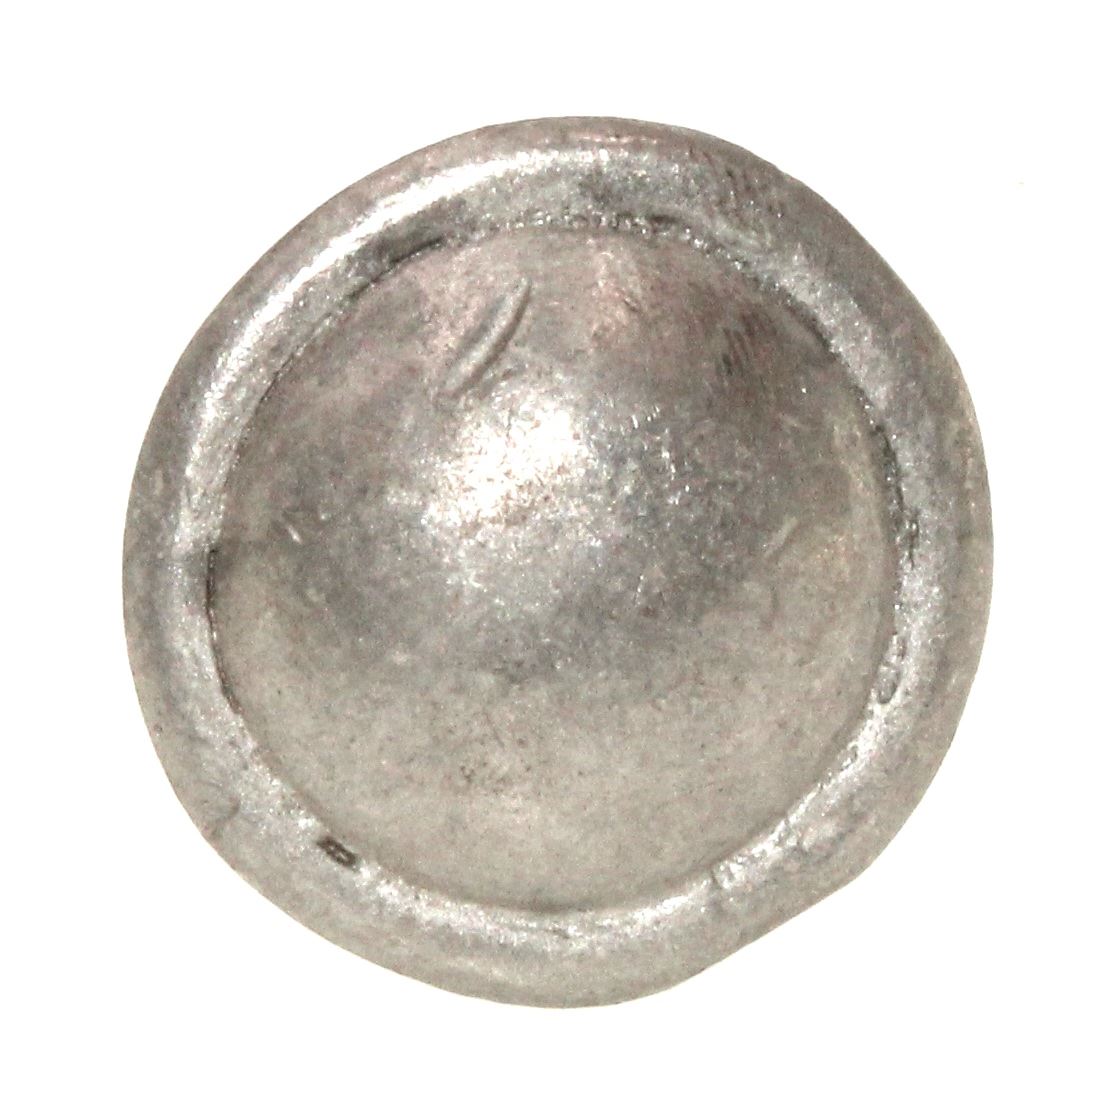 Anne at Home Une Grande Button 1 1/8" Knob Pewter with White Wash 1045-135